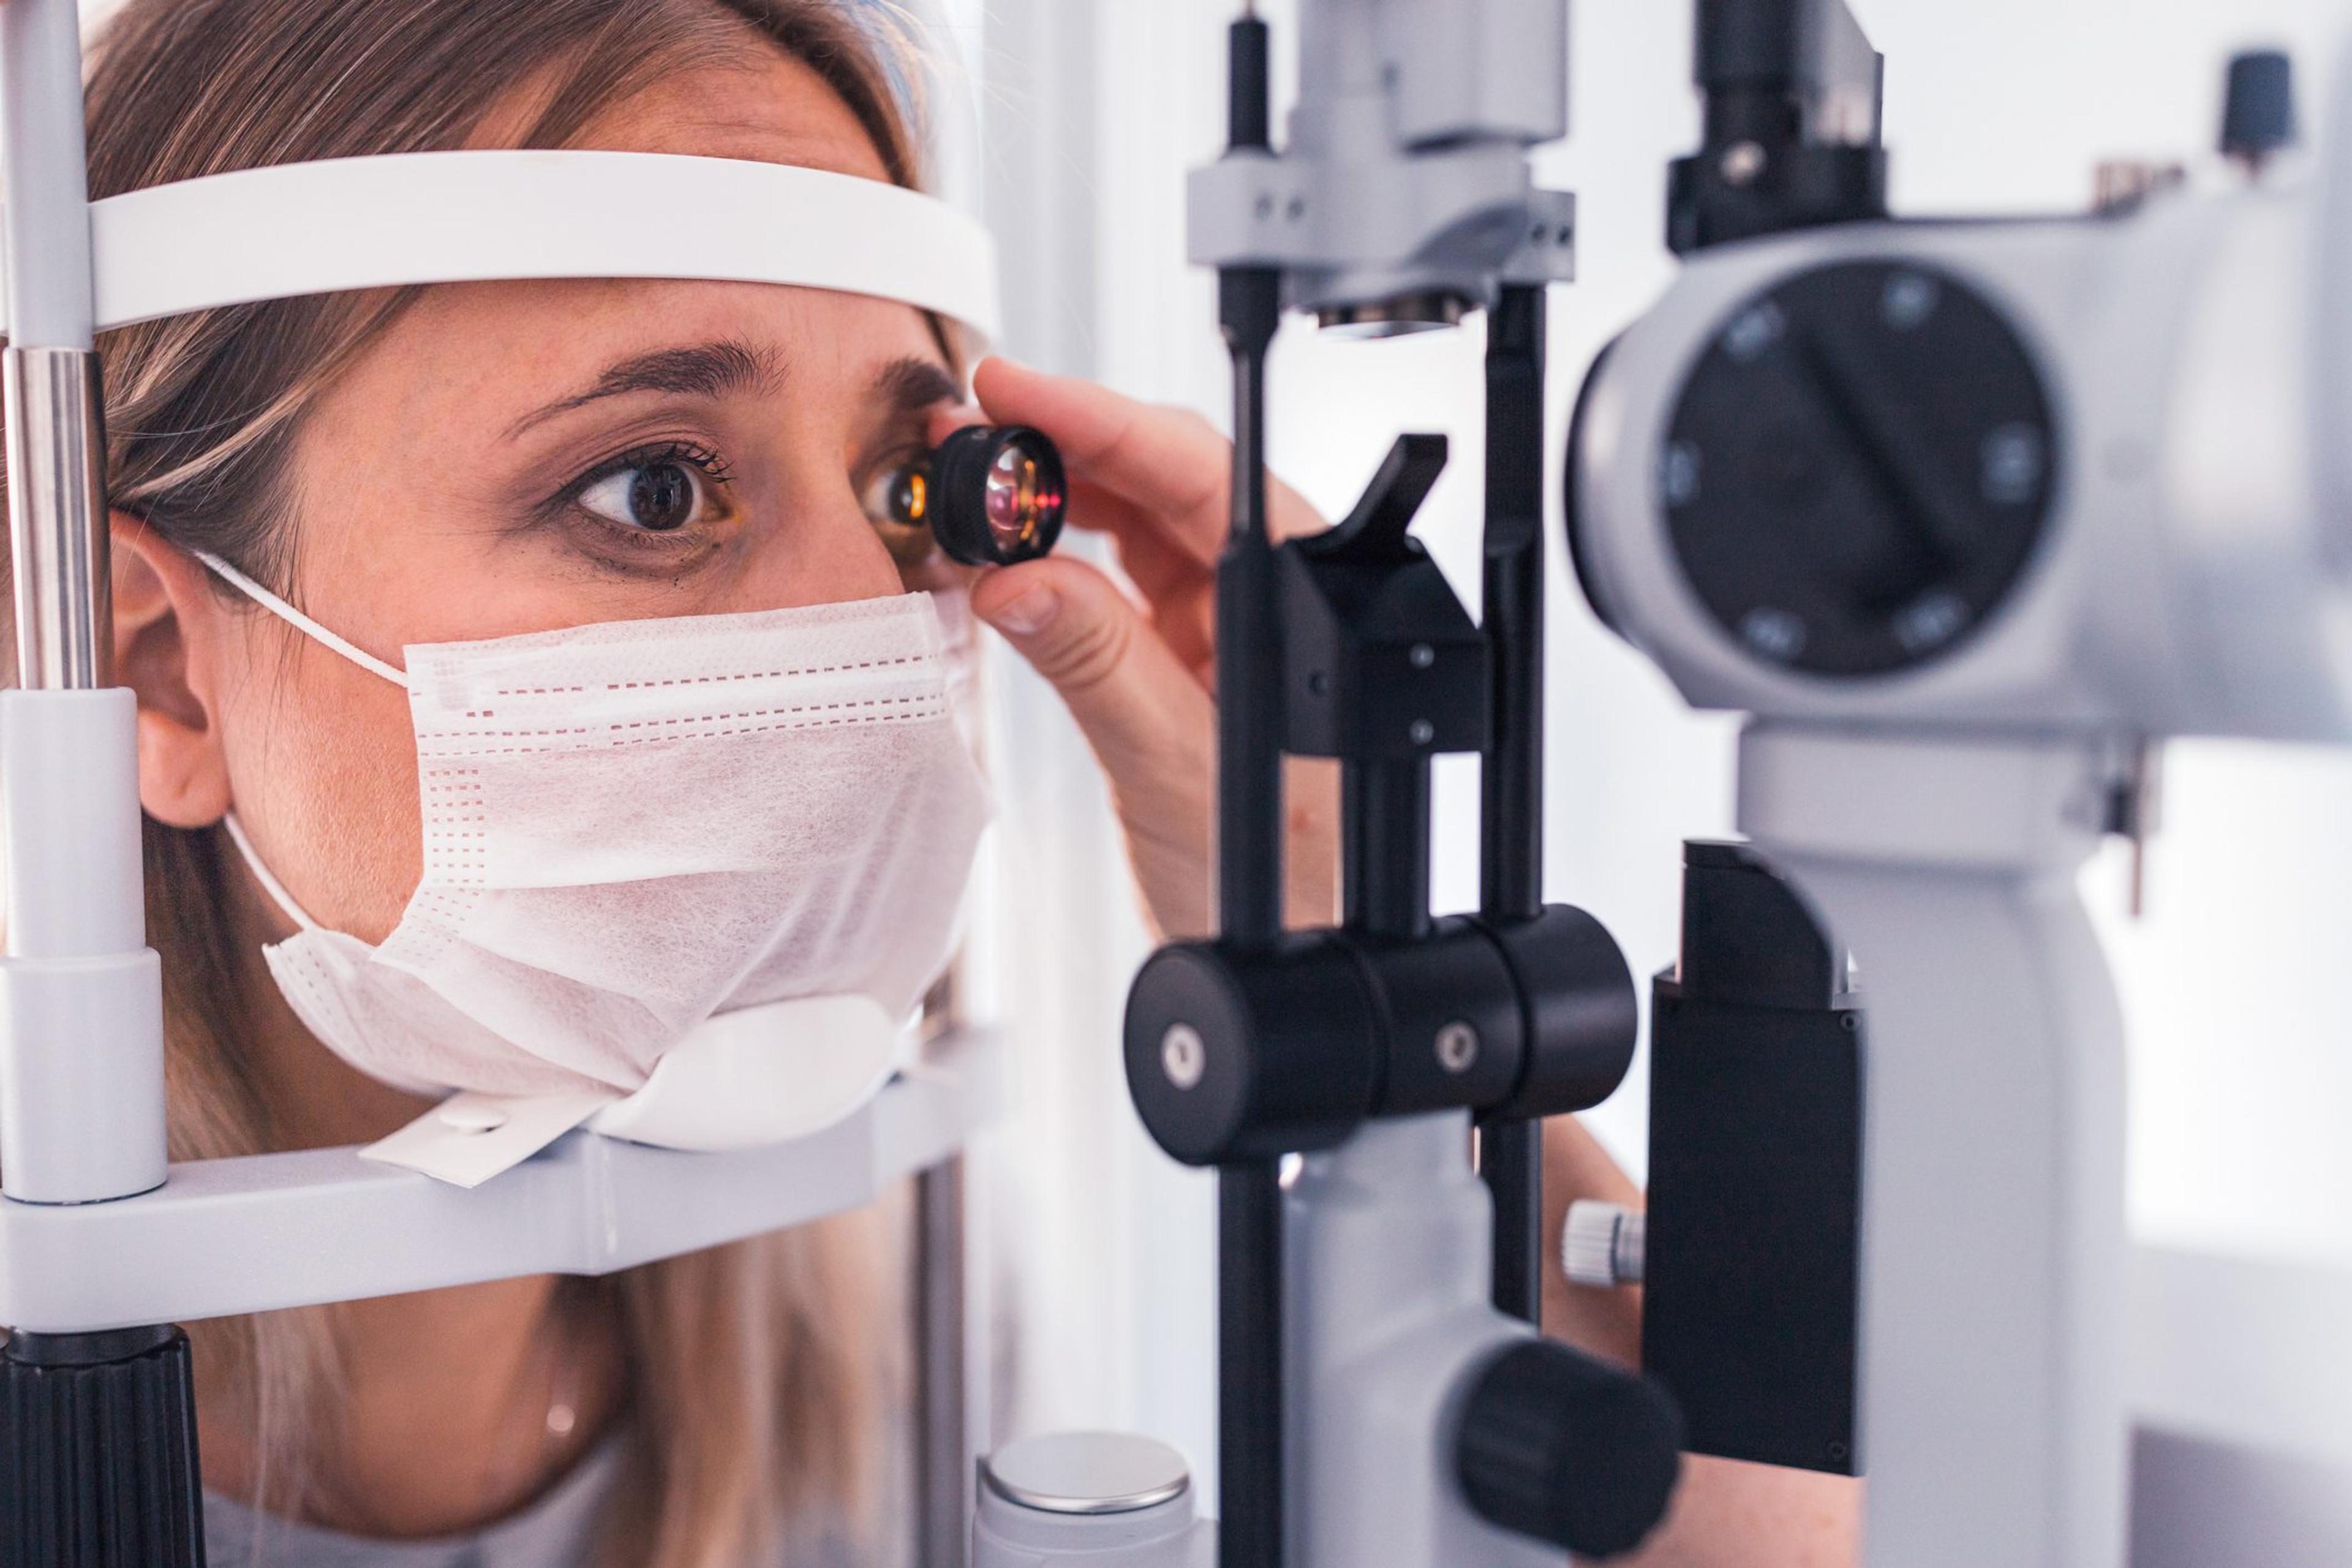 A young woman with long, sandy hair peers through a lense in an eye exam.